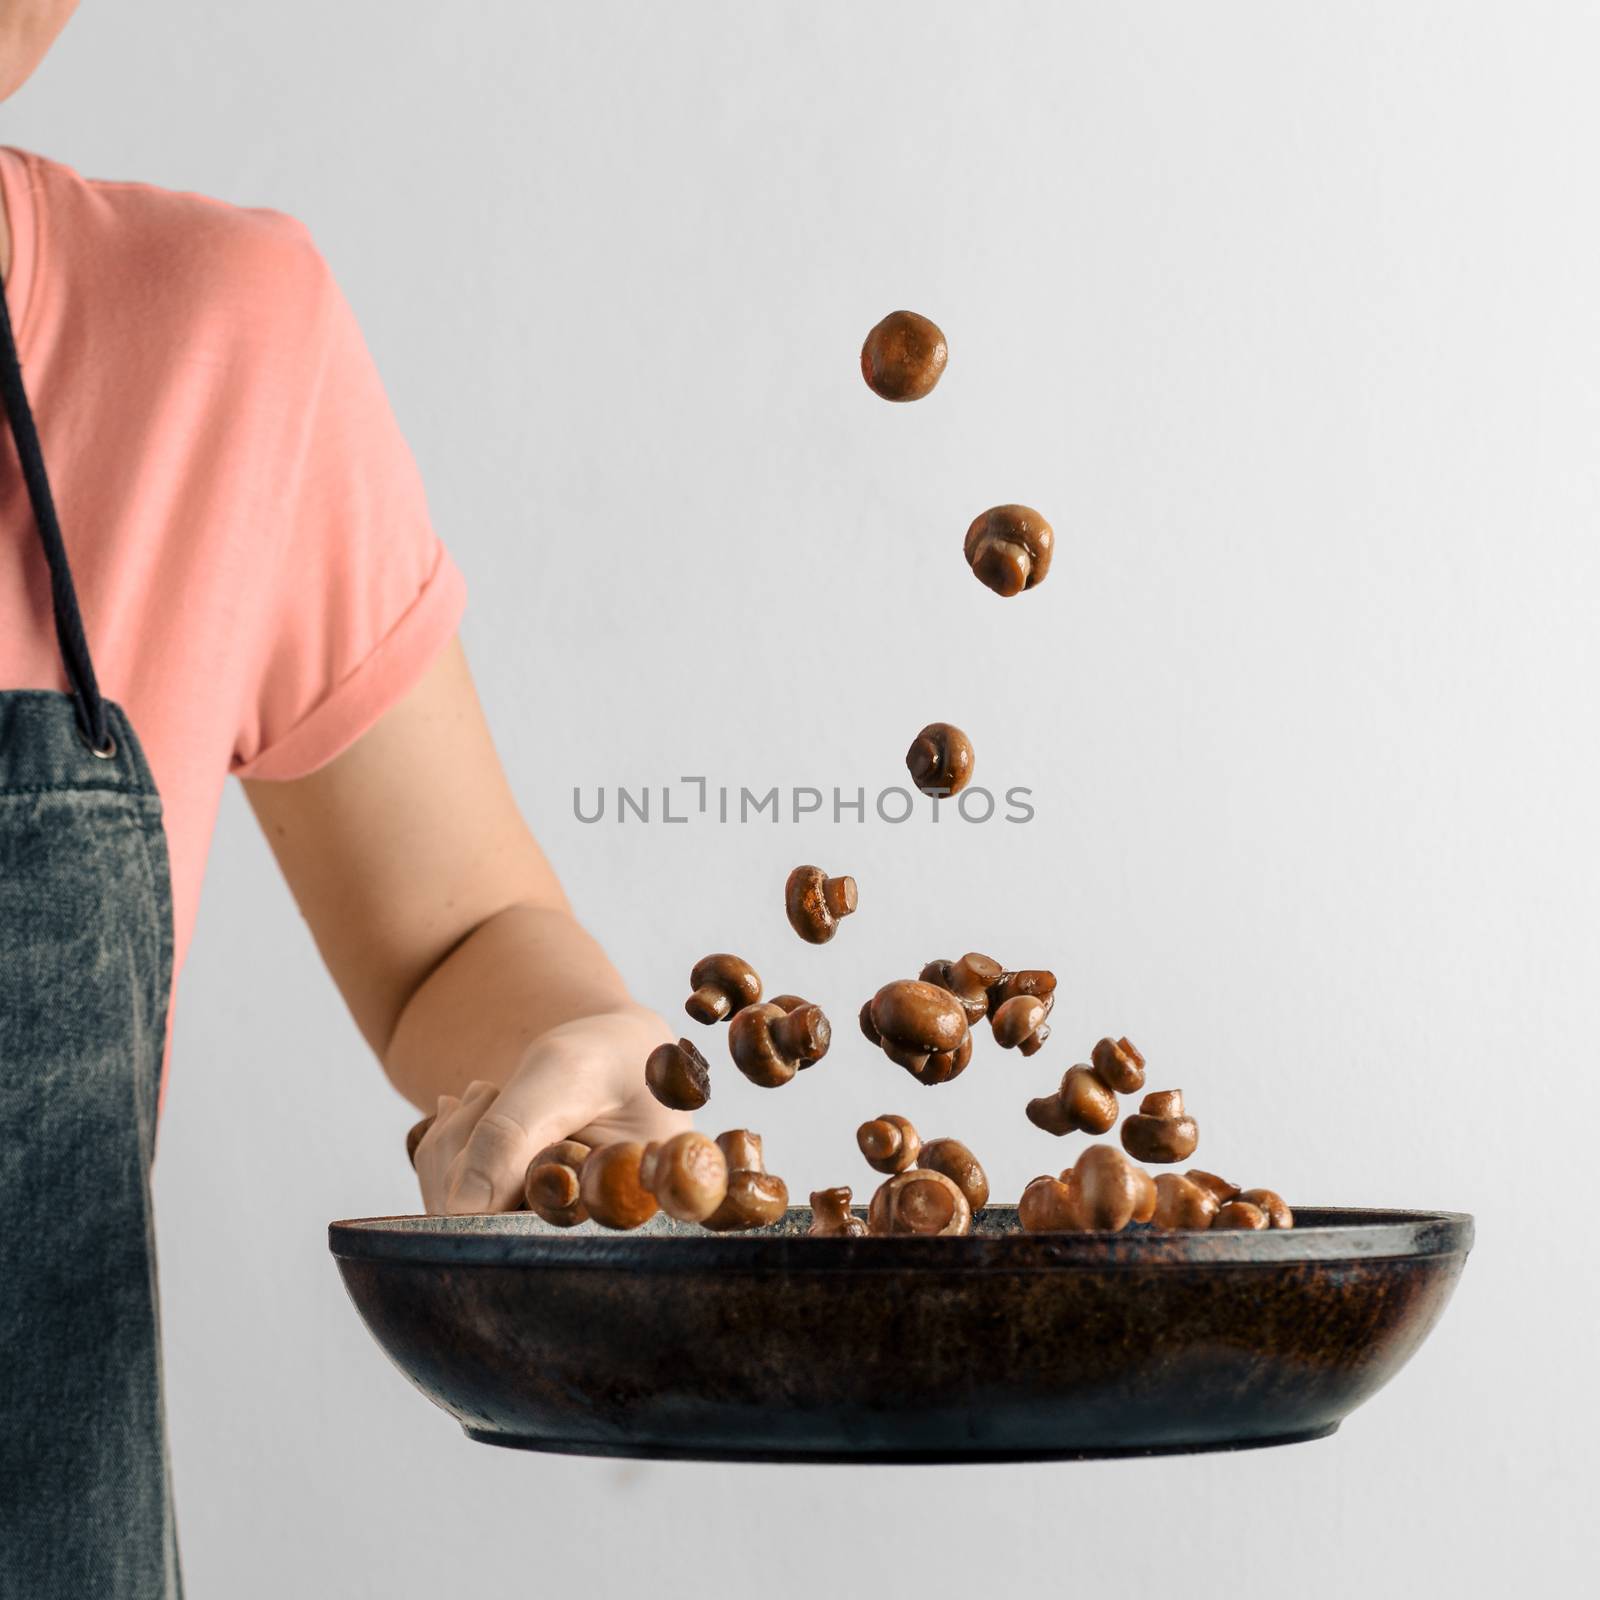 Flying champignons over skillet in hand by fascinadora